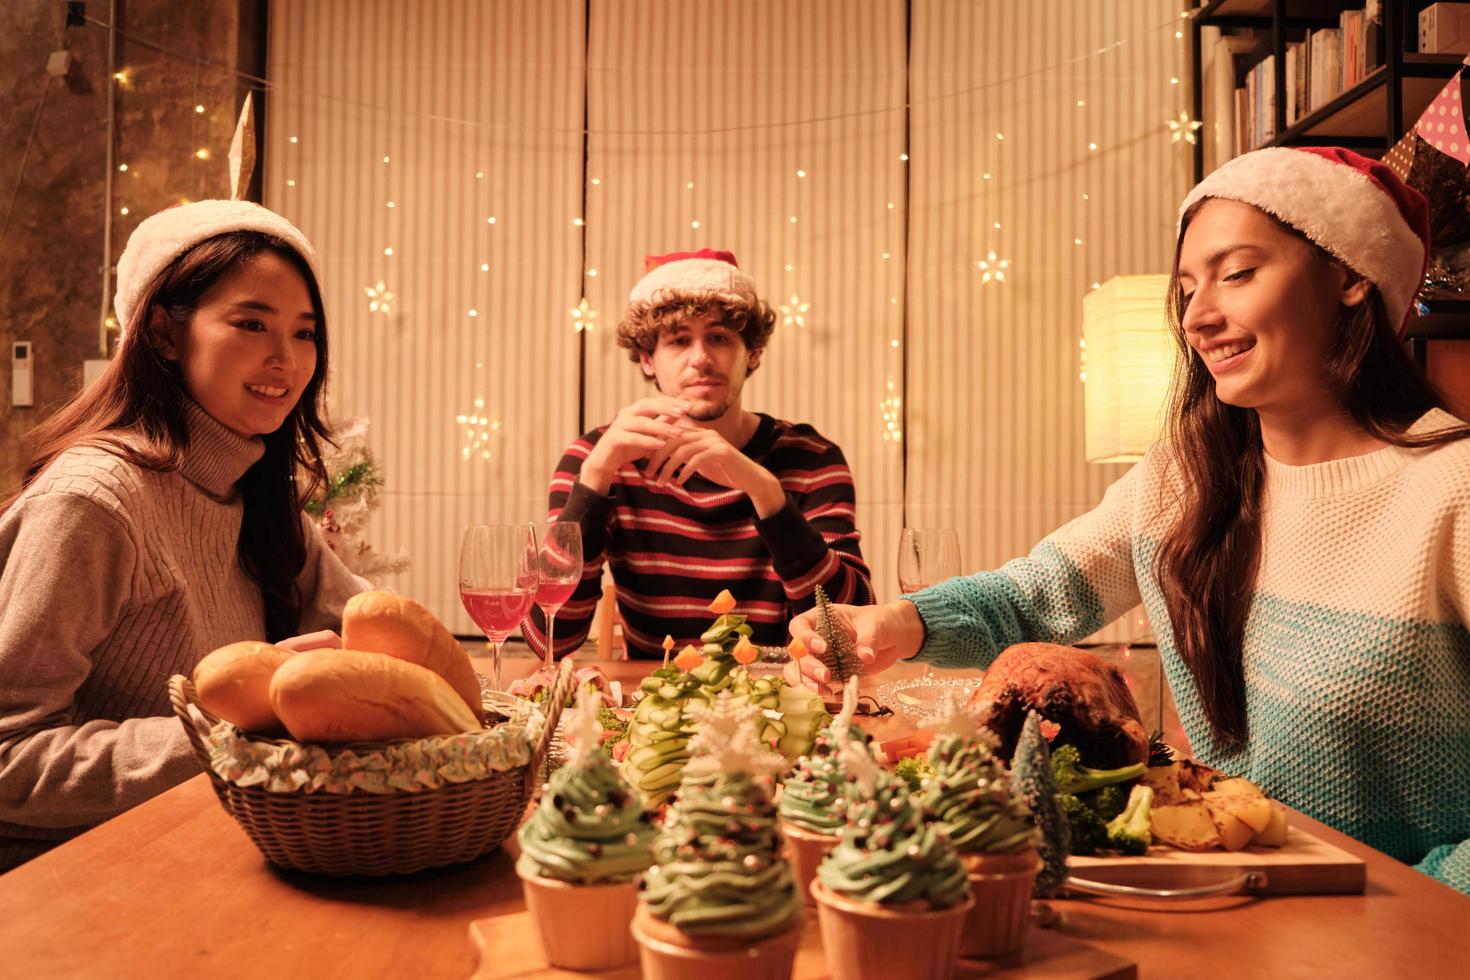 Friends enjoy fun eating diner at a table with specials meals, a young woman picks up the food ornament at home's dining room, decorated for Christmas festival, and New Year celebration party. photo